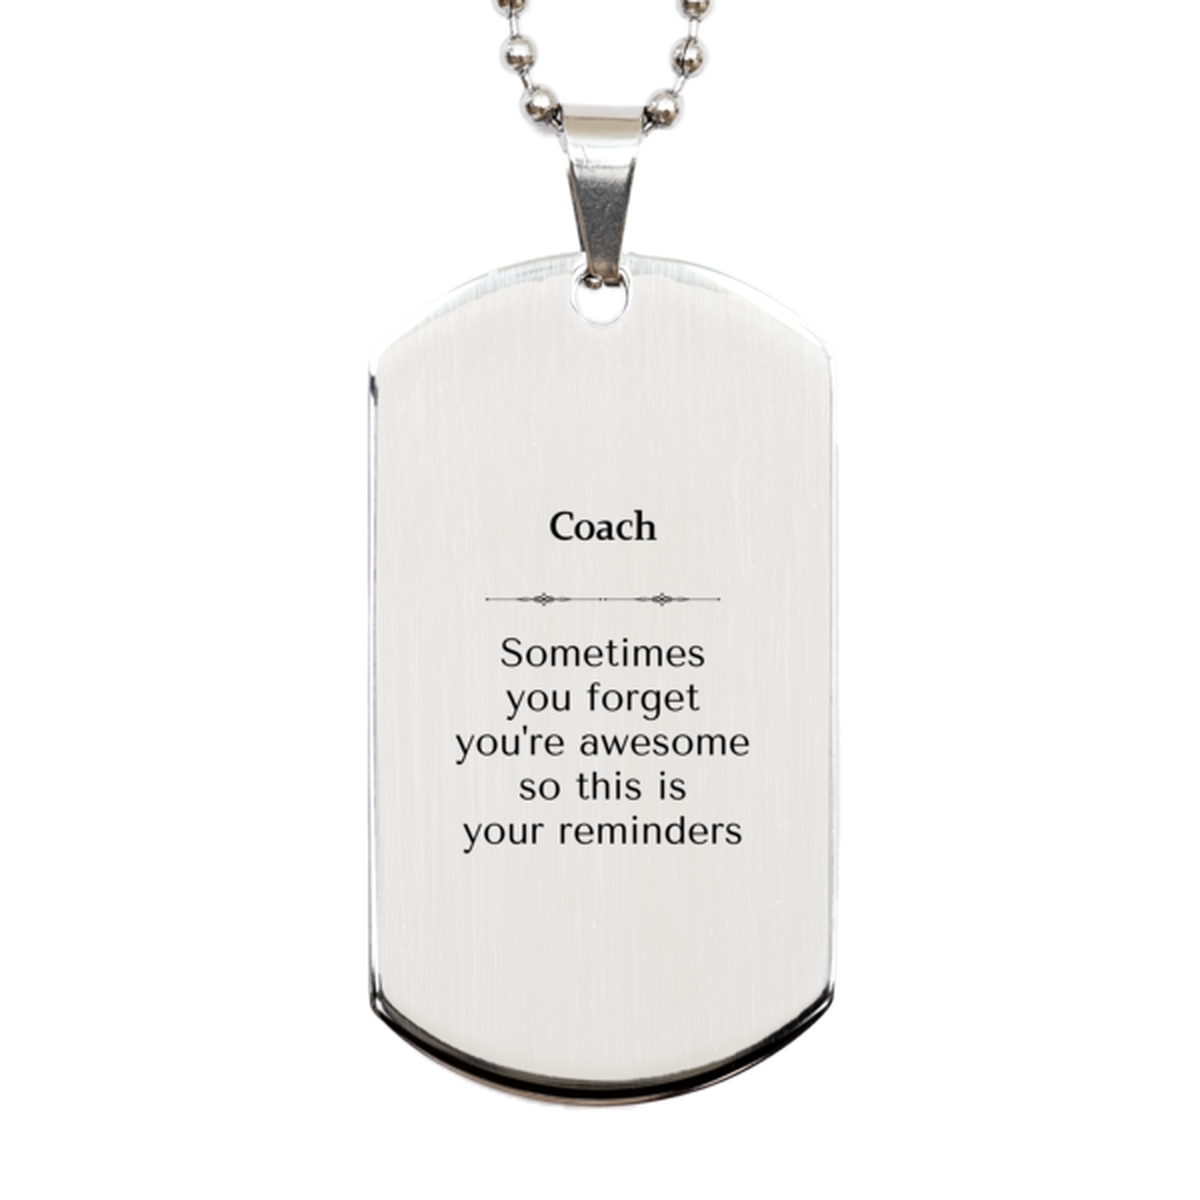 Sentimental Coach Silver Dog Tag, Coach Sometimes you forget you're awesome so this is your reminders, Graduation Christmas Birthday Gifts for Coach, Men, Women, Coworkers